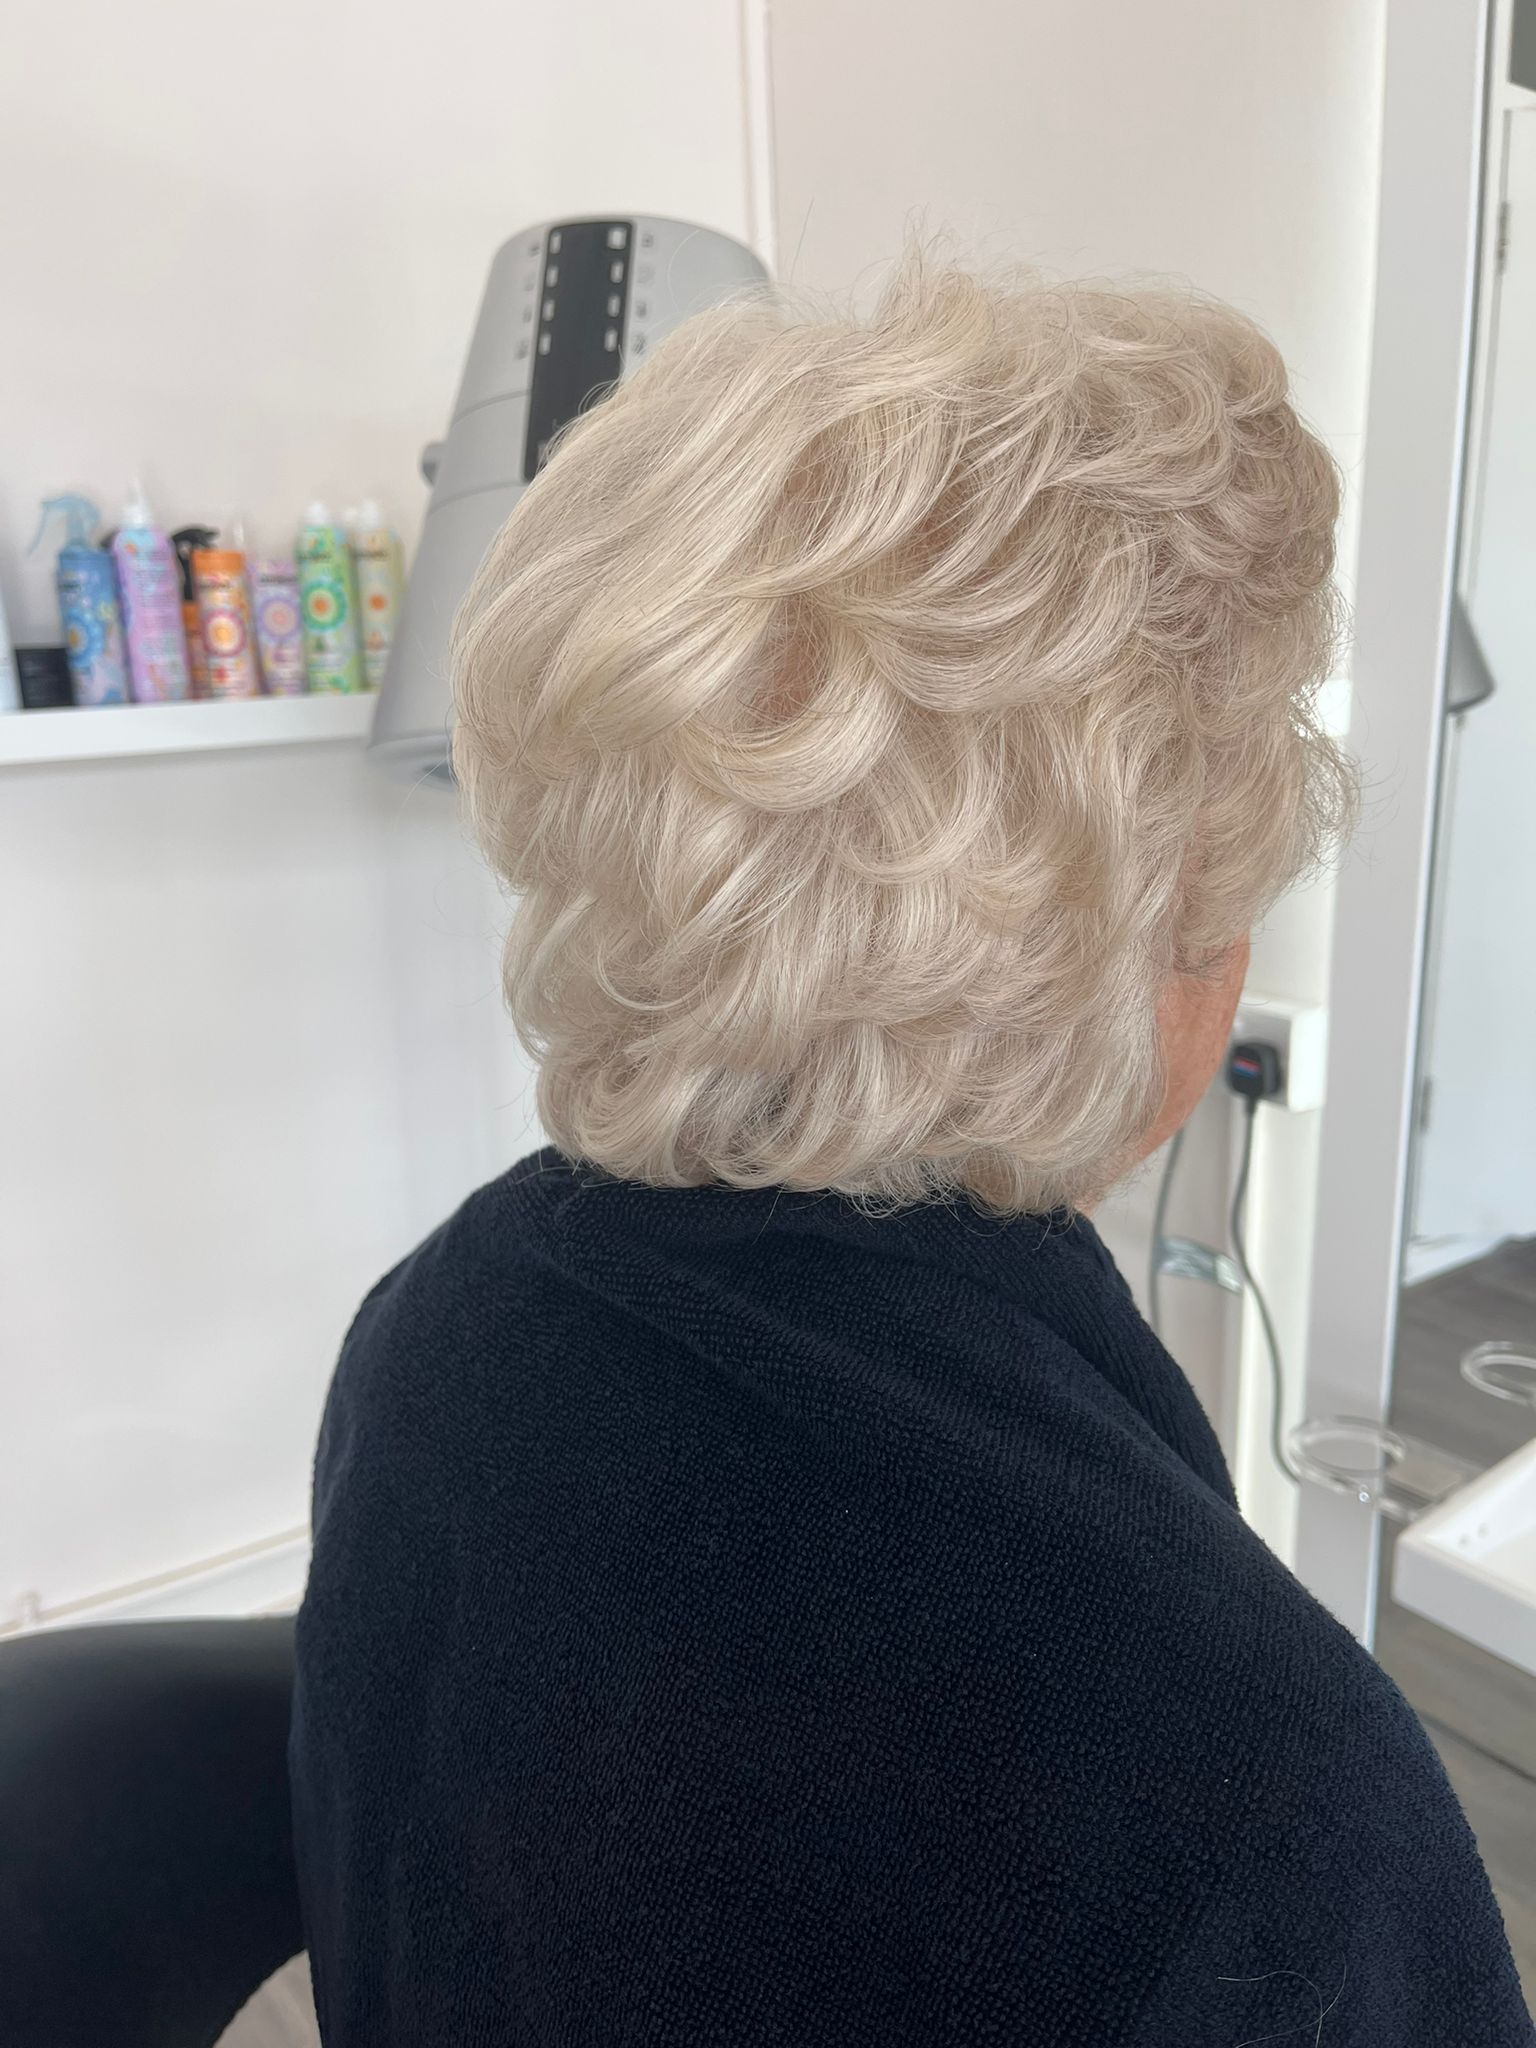 Classic cut and blow dry